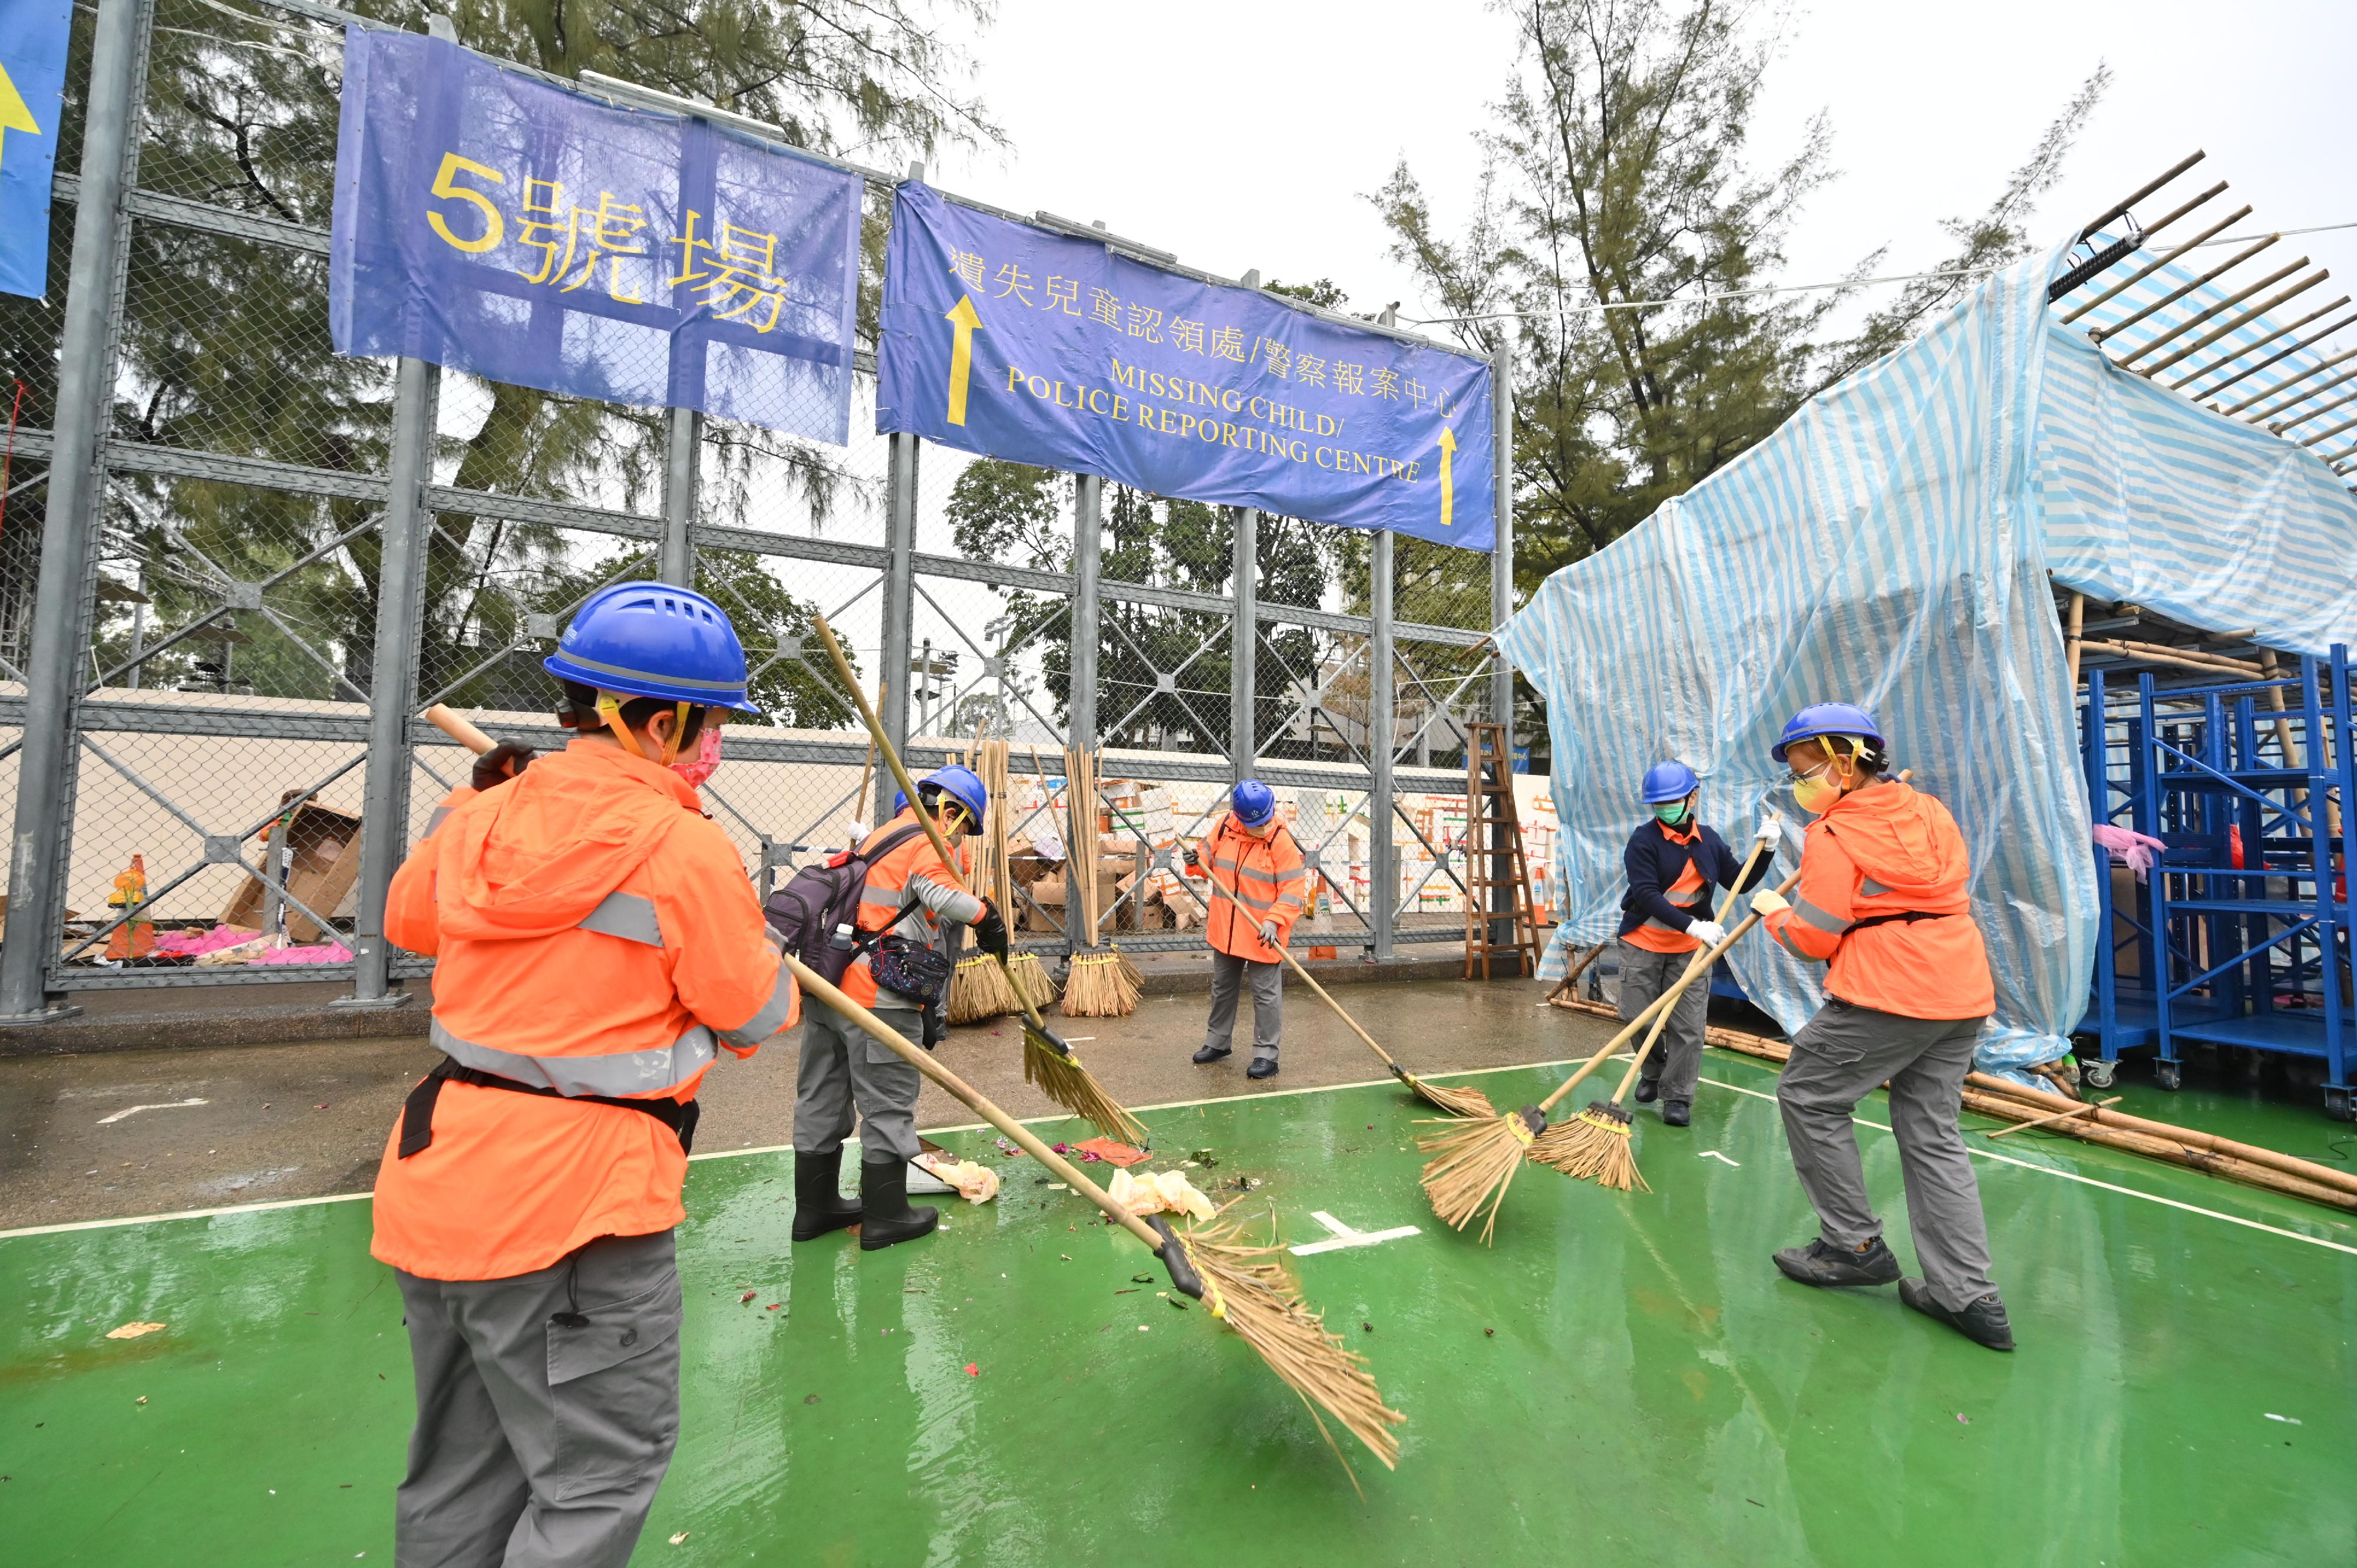 The 2023 Lunar New Year (LNY) Fair concluded successfully at 2am today (January 22). Photo shows cleaning workers cleaning up the Victoria Park LNY Fair site after the fair ended.